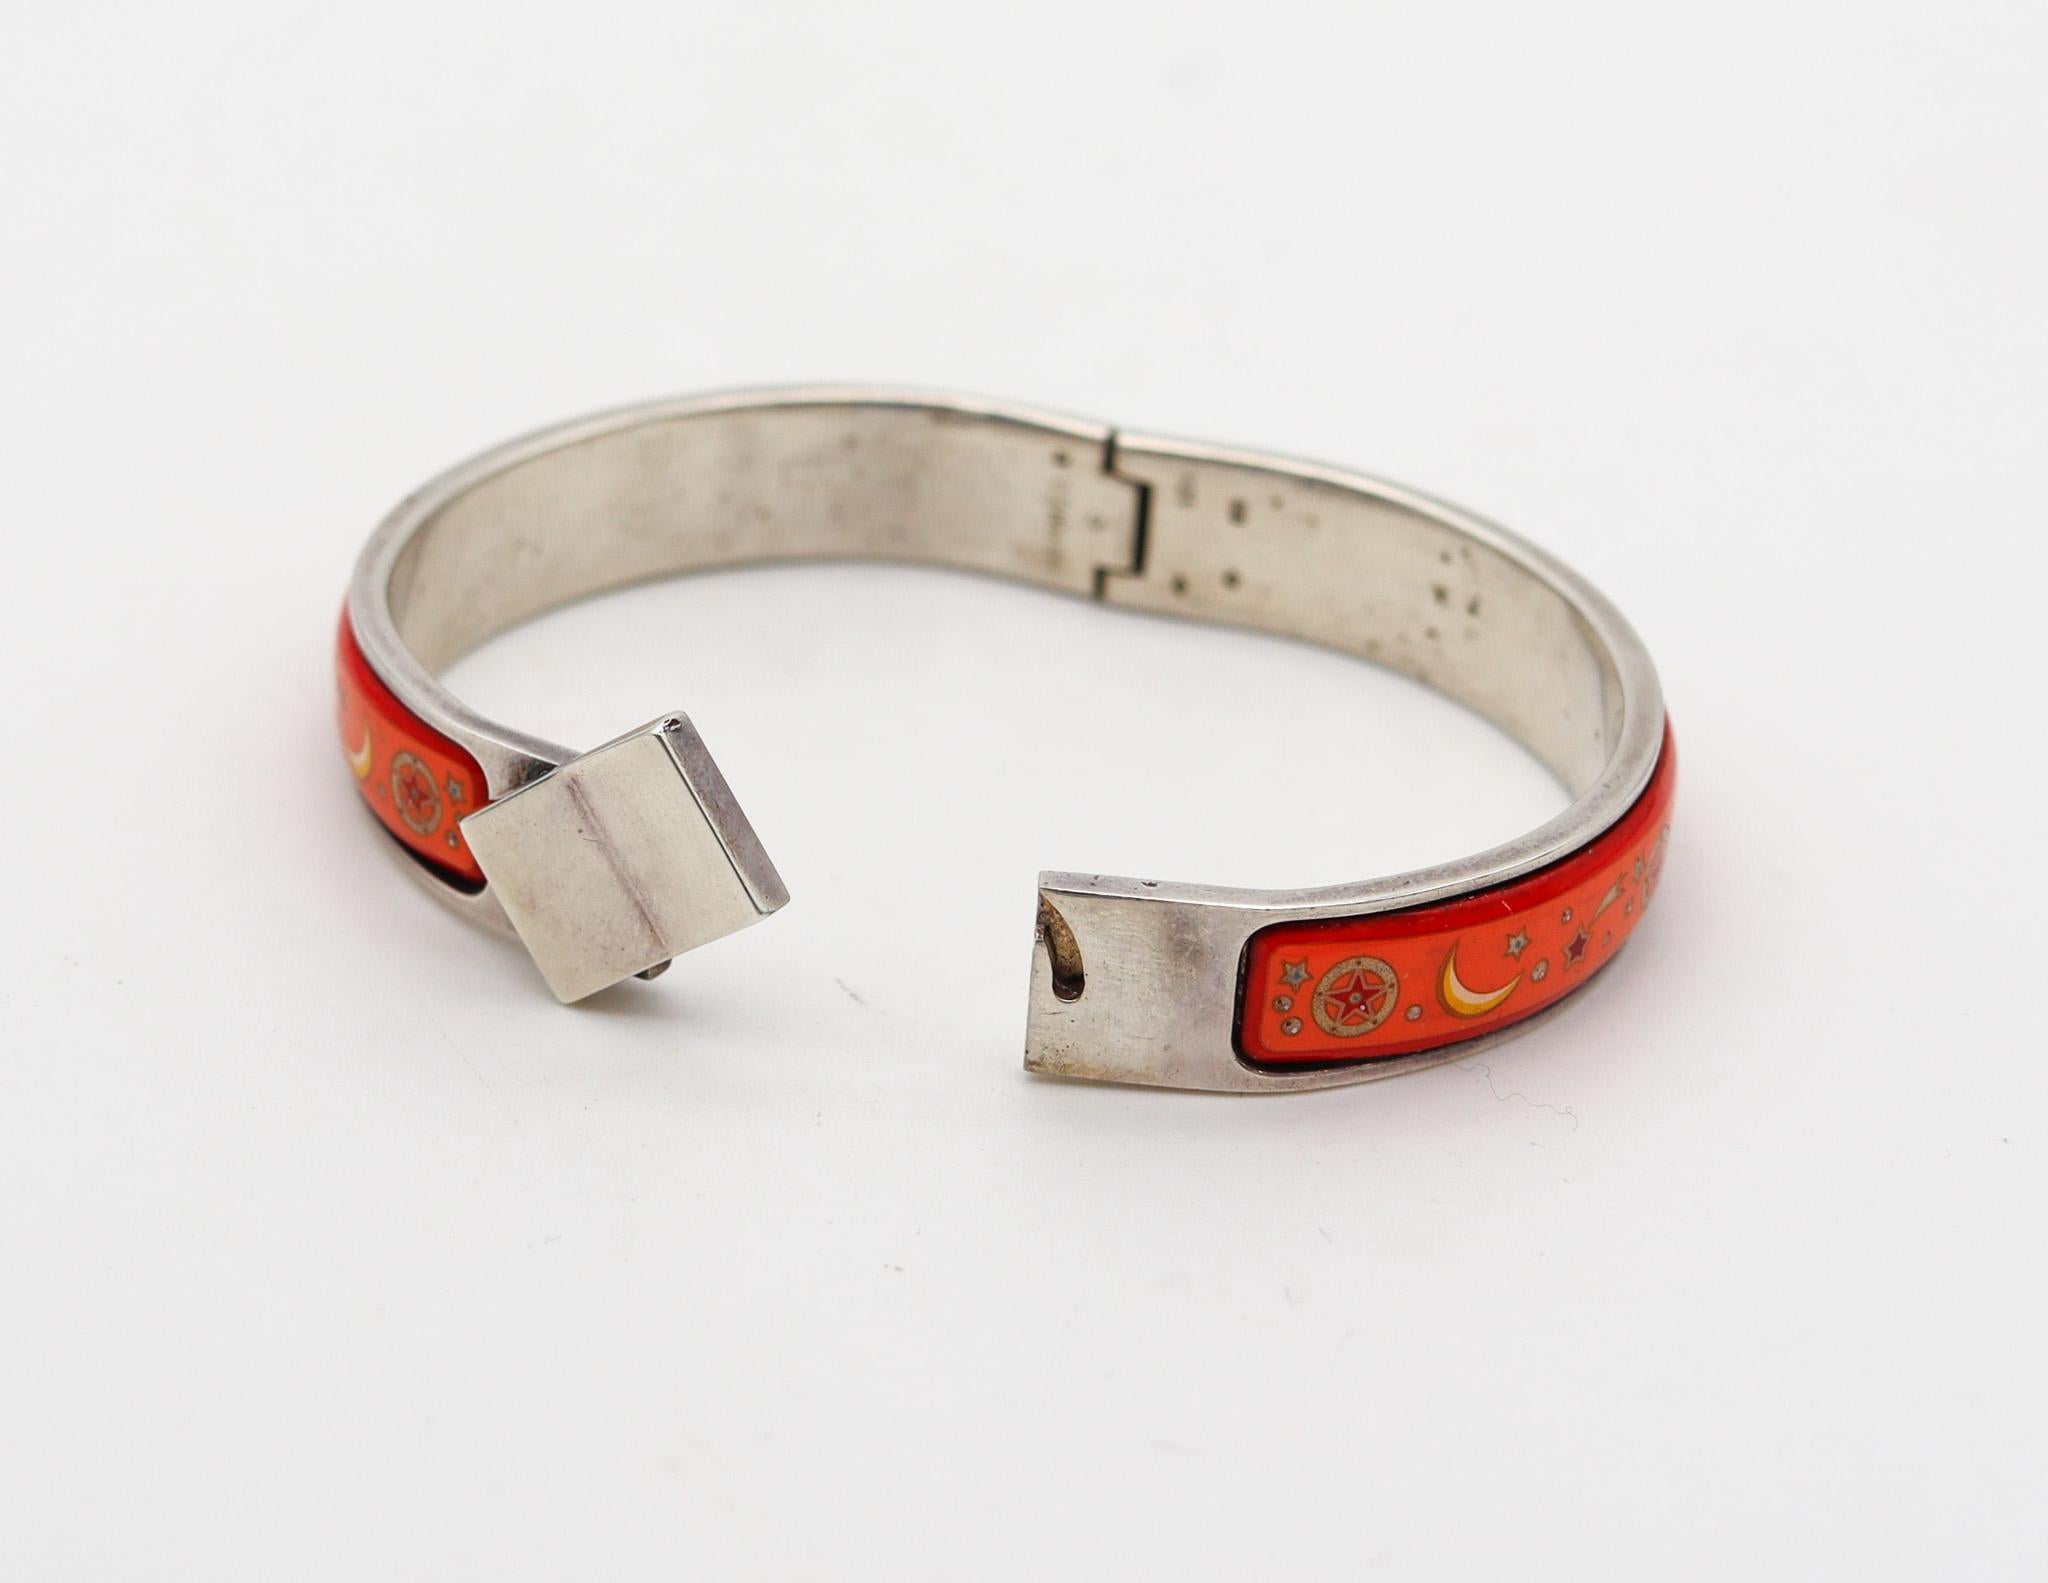 Hermes Paris 1990 Clic Clac Bangle Bracelet In .925 Sterling Silver With Enamel For Sale 3